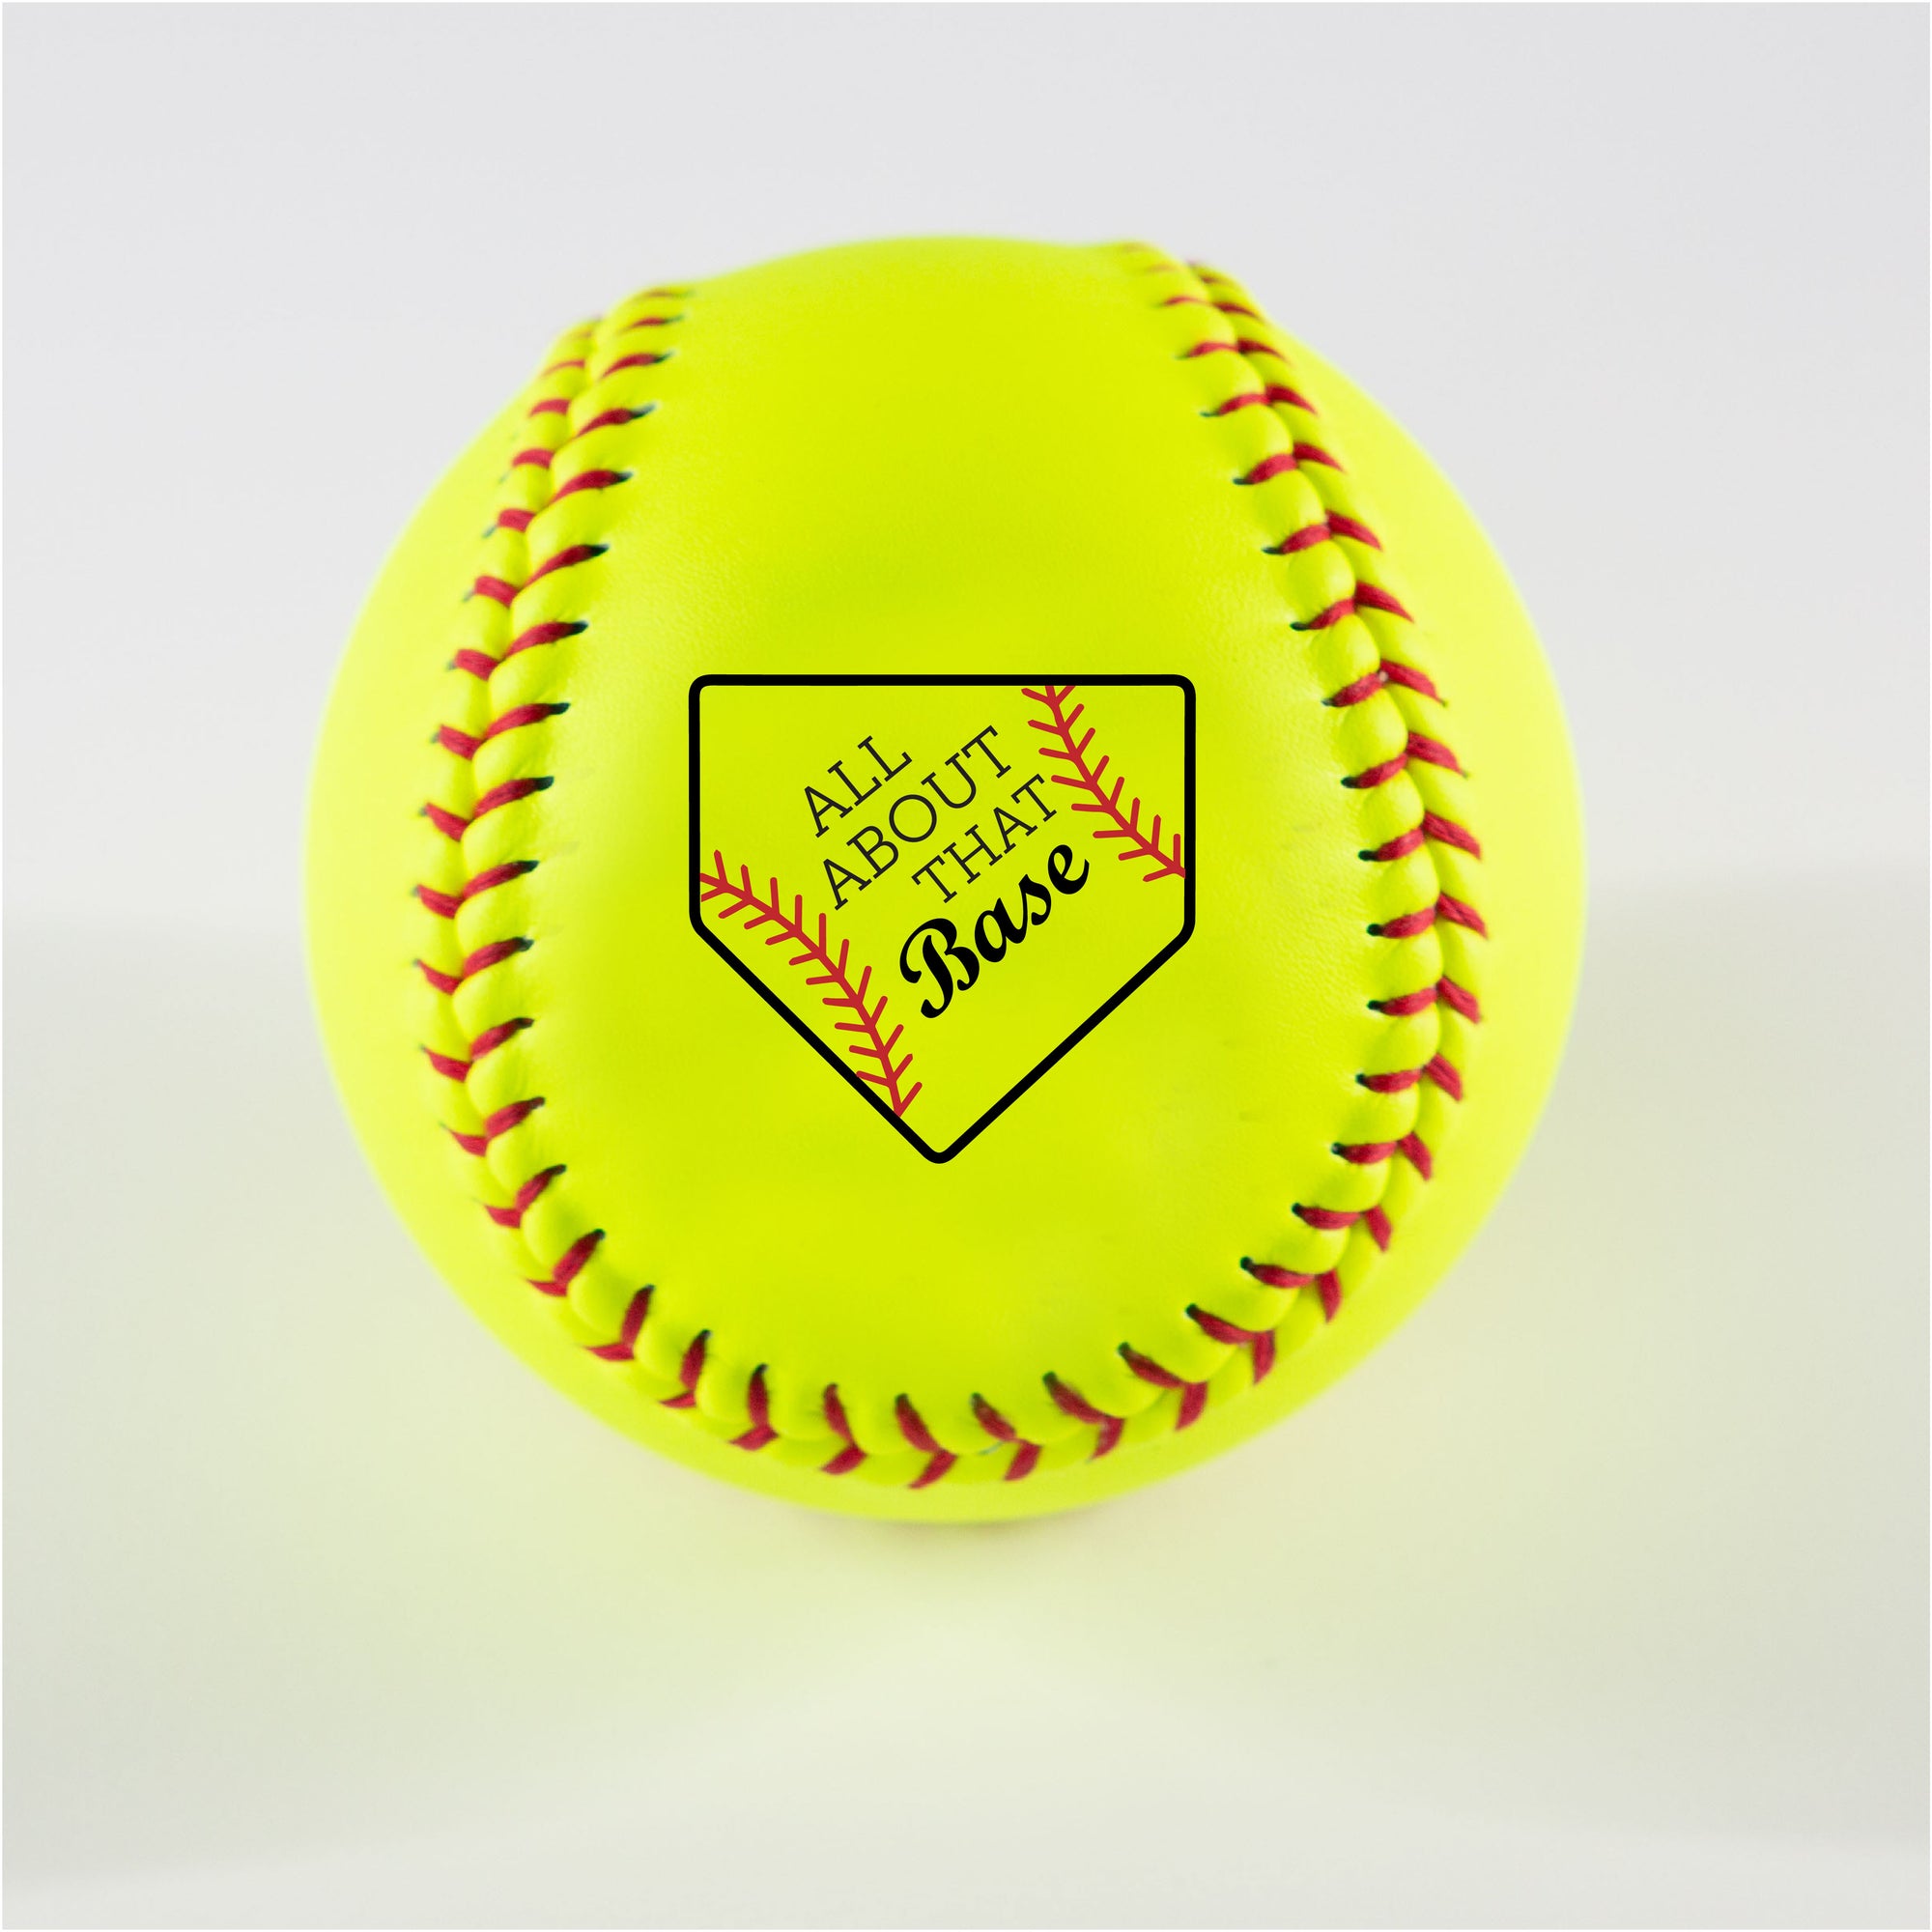 Printed Softball with All About That Base Design